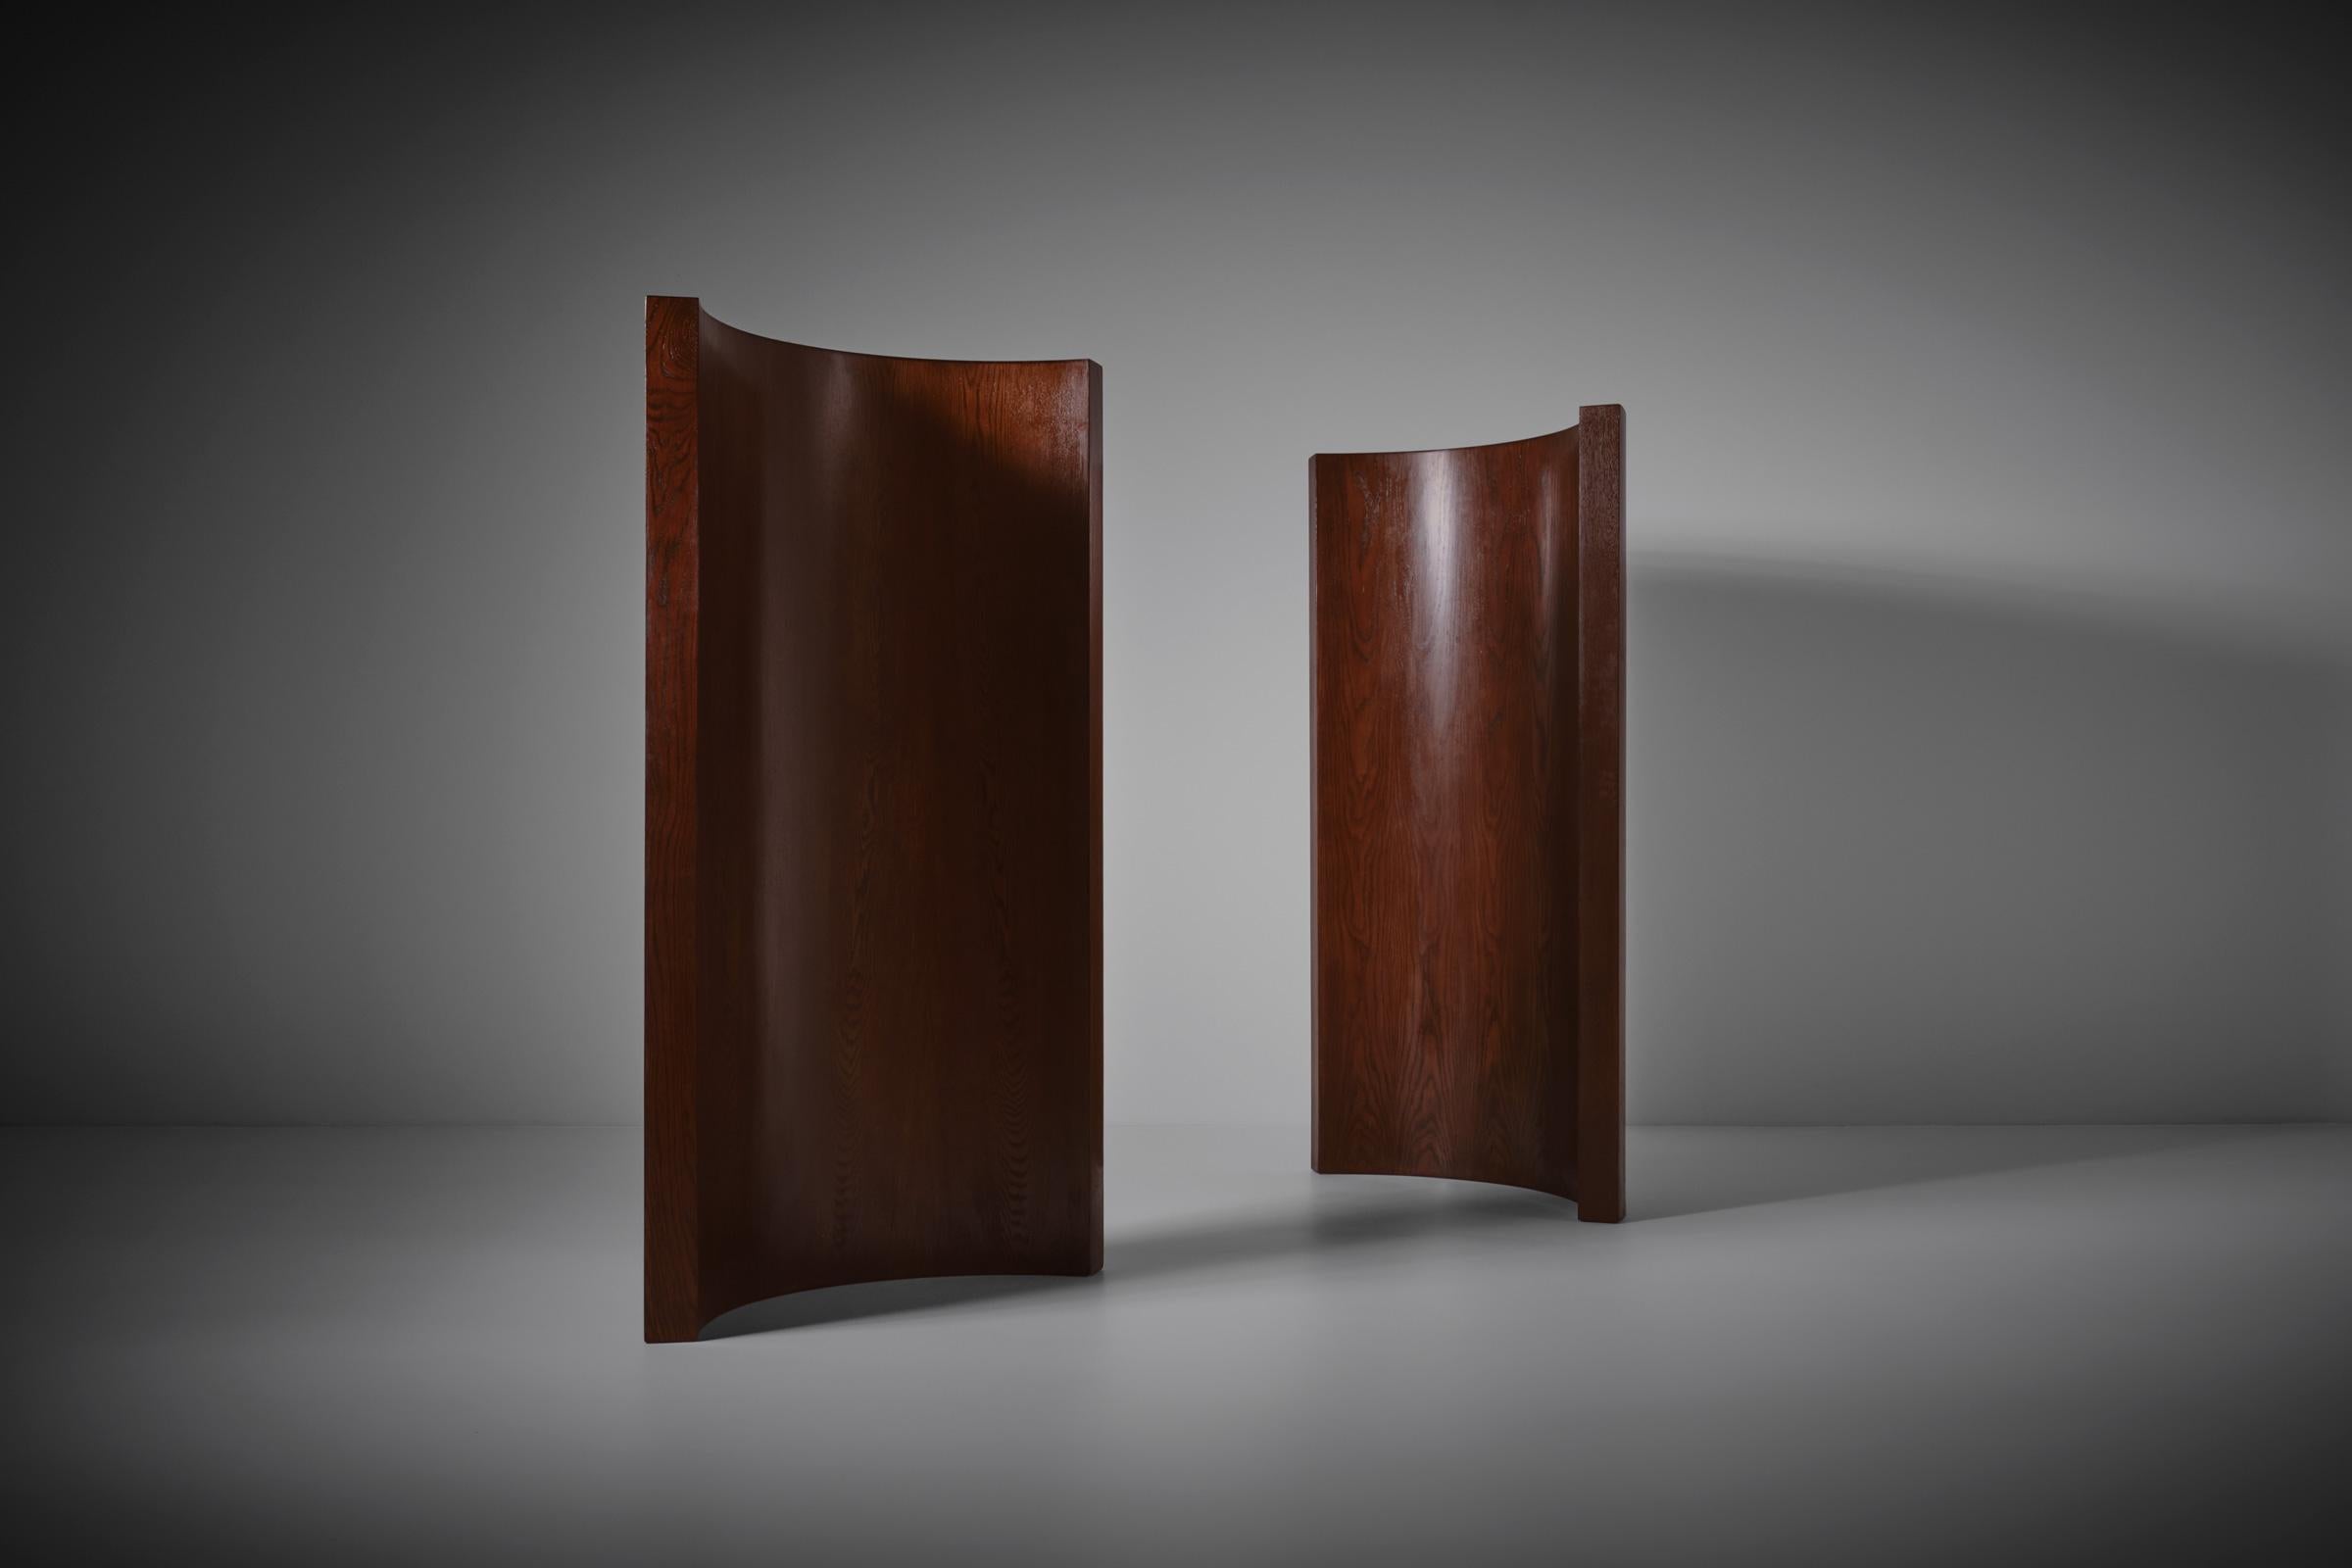 Sculptural wooden Room Dividers, 1960s. Interesting round shaped screens in Oak veneer with a characteristic outspoken wood grain. The screens add a very nice sculptural and Modernist feeling to the space. Due to their uncommon round shapes, very